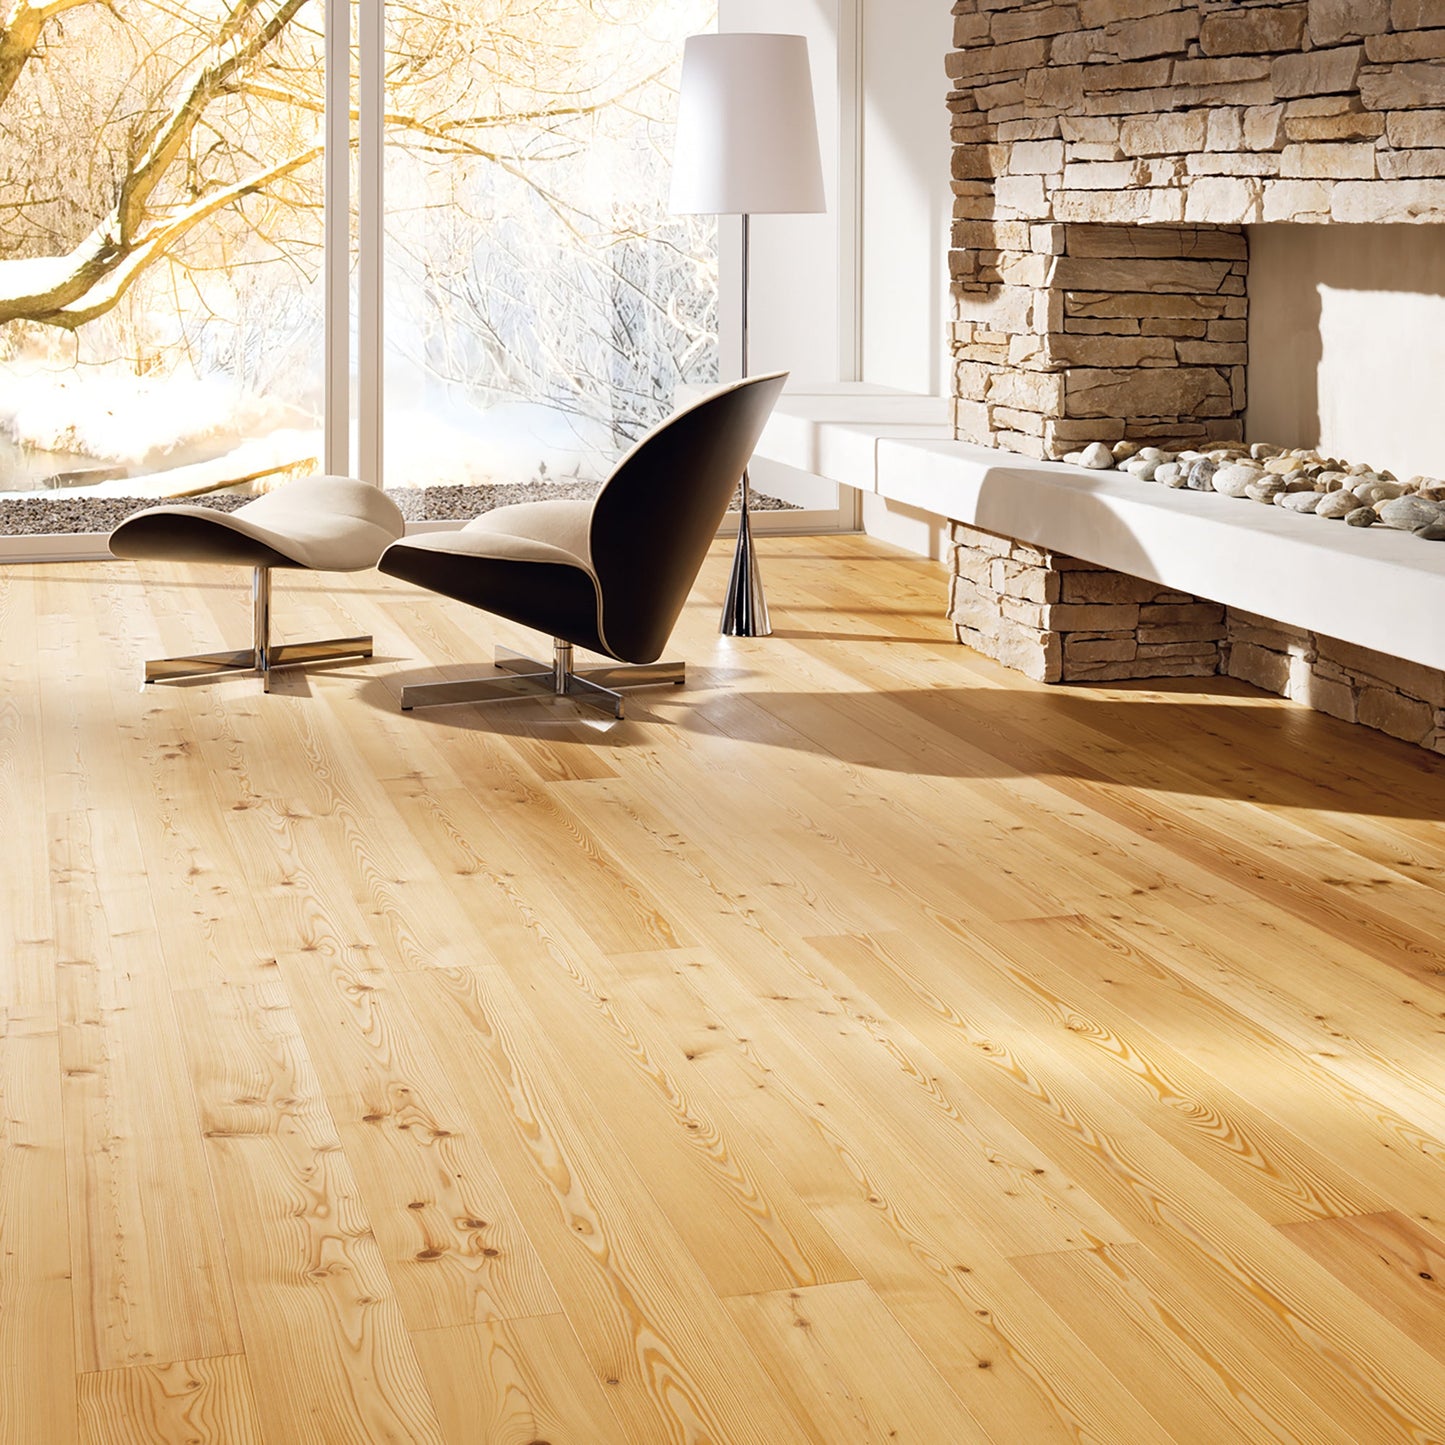 MEZZO Larch, wooden flooring, oiled natural